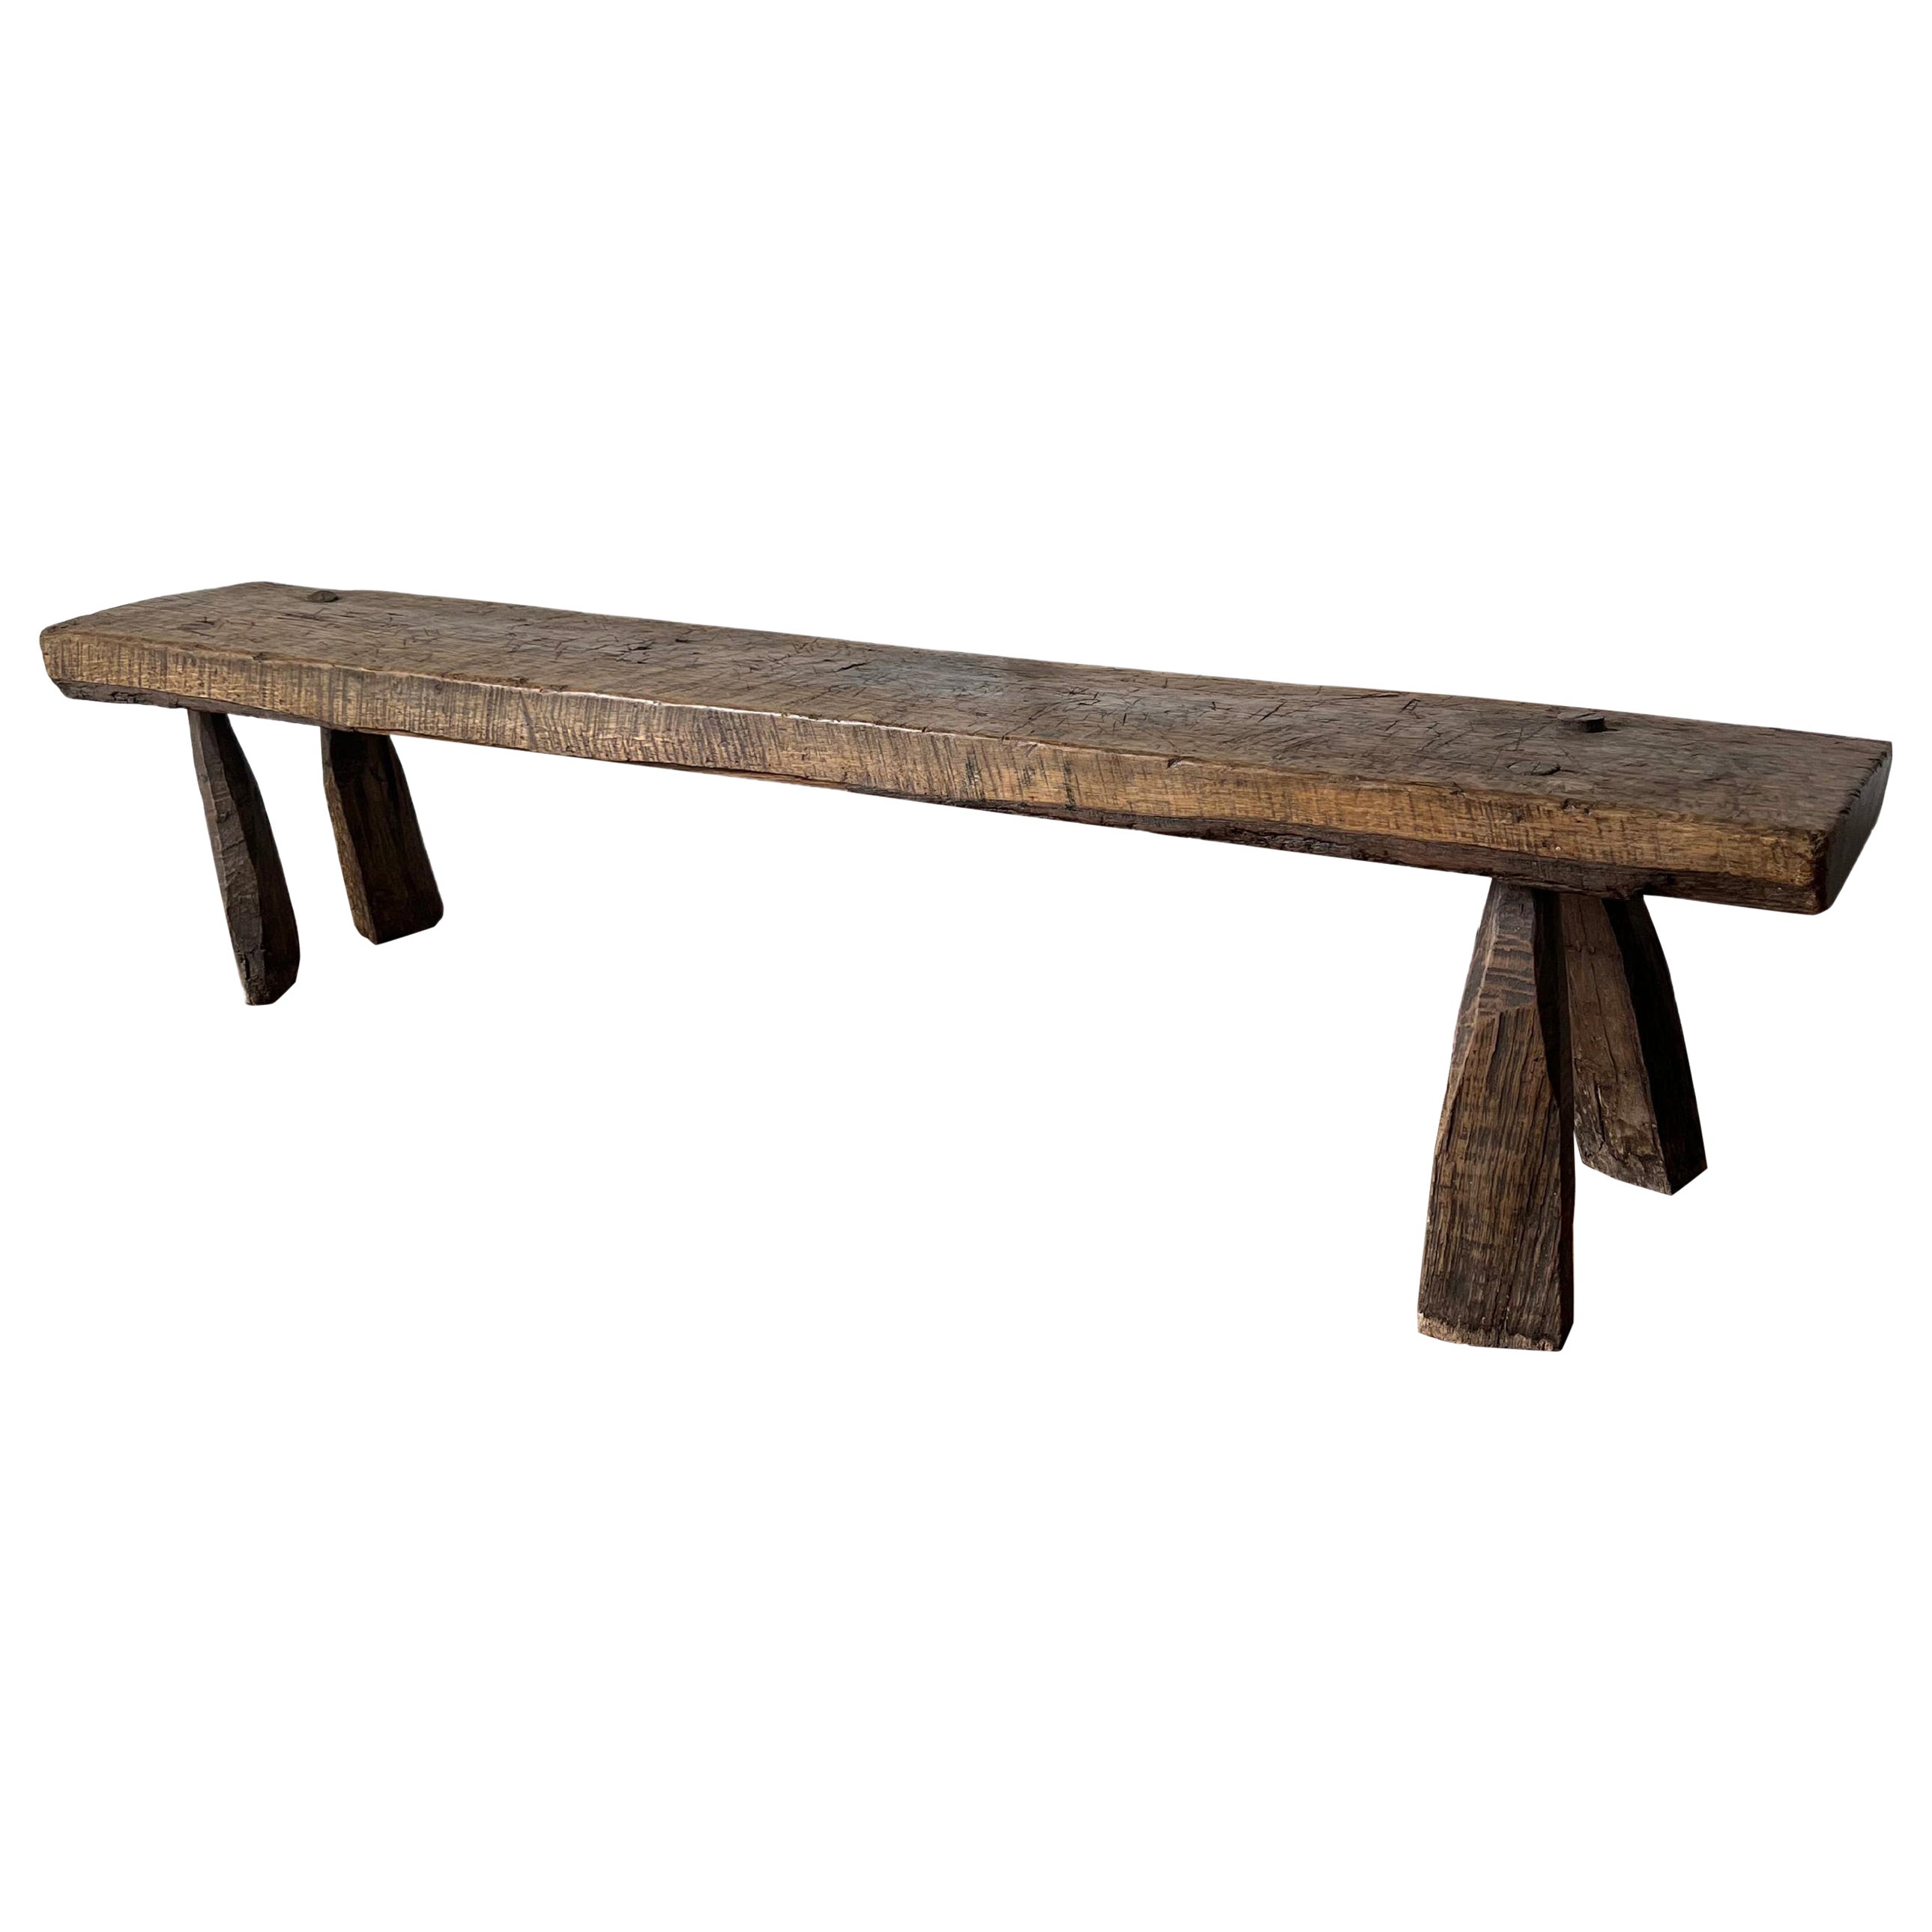 17th Century American Bench in Carved Pine with Incredible Patina